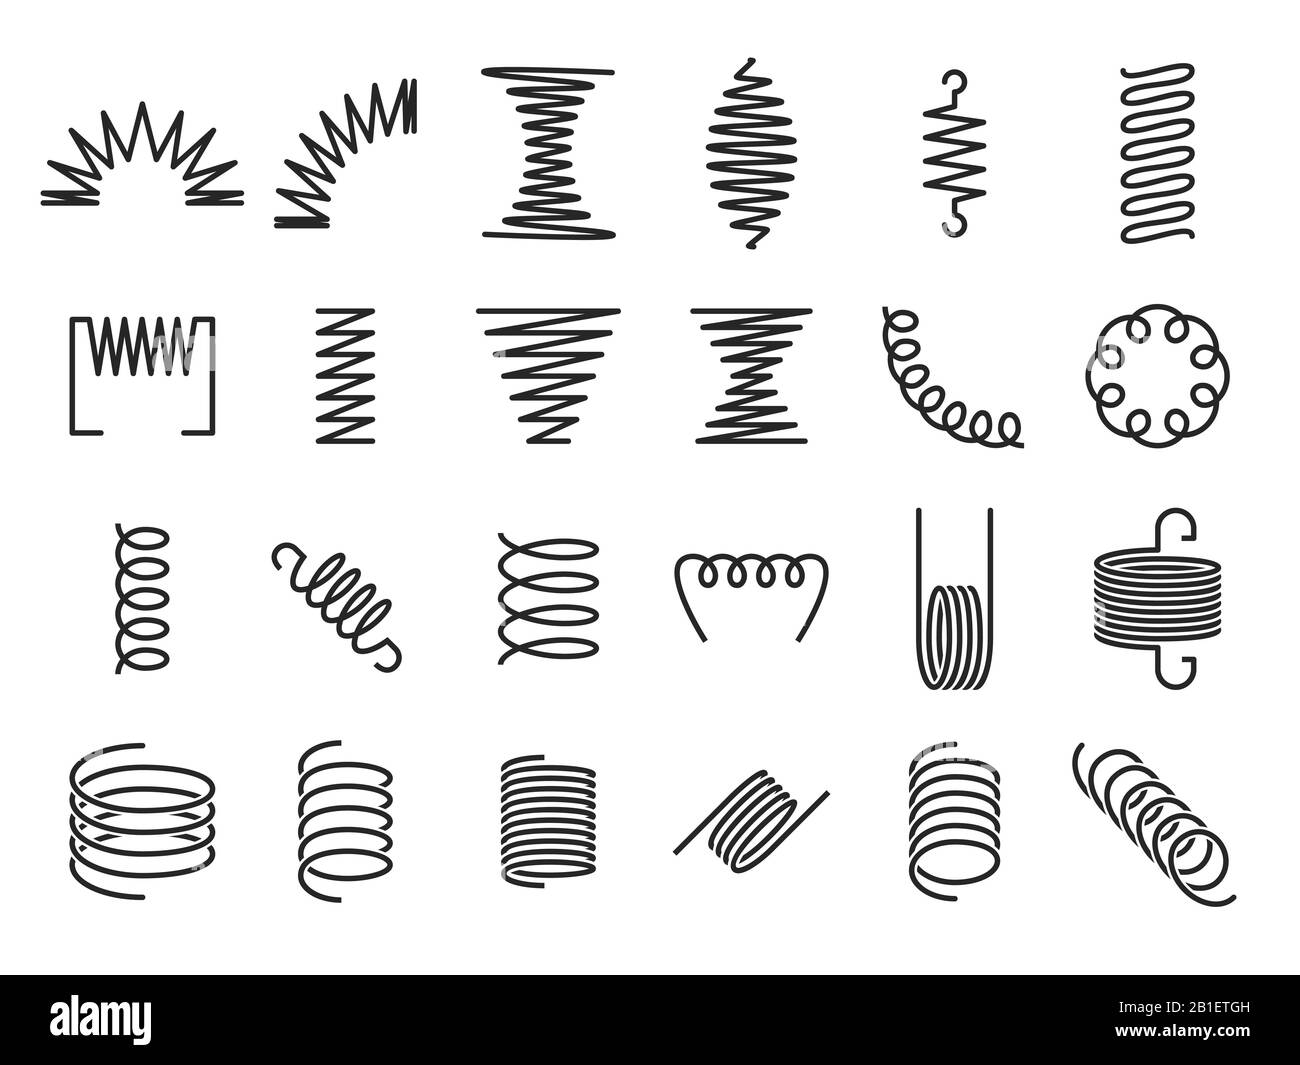 Spring coils. Metal spiral springs, metallic coil and linear spirals silhouette vector icon set Stock Vector